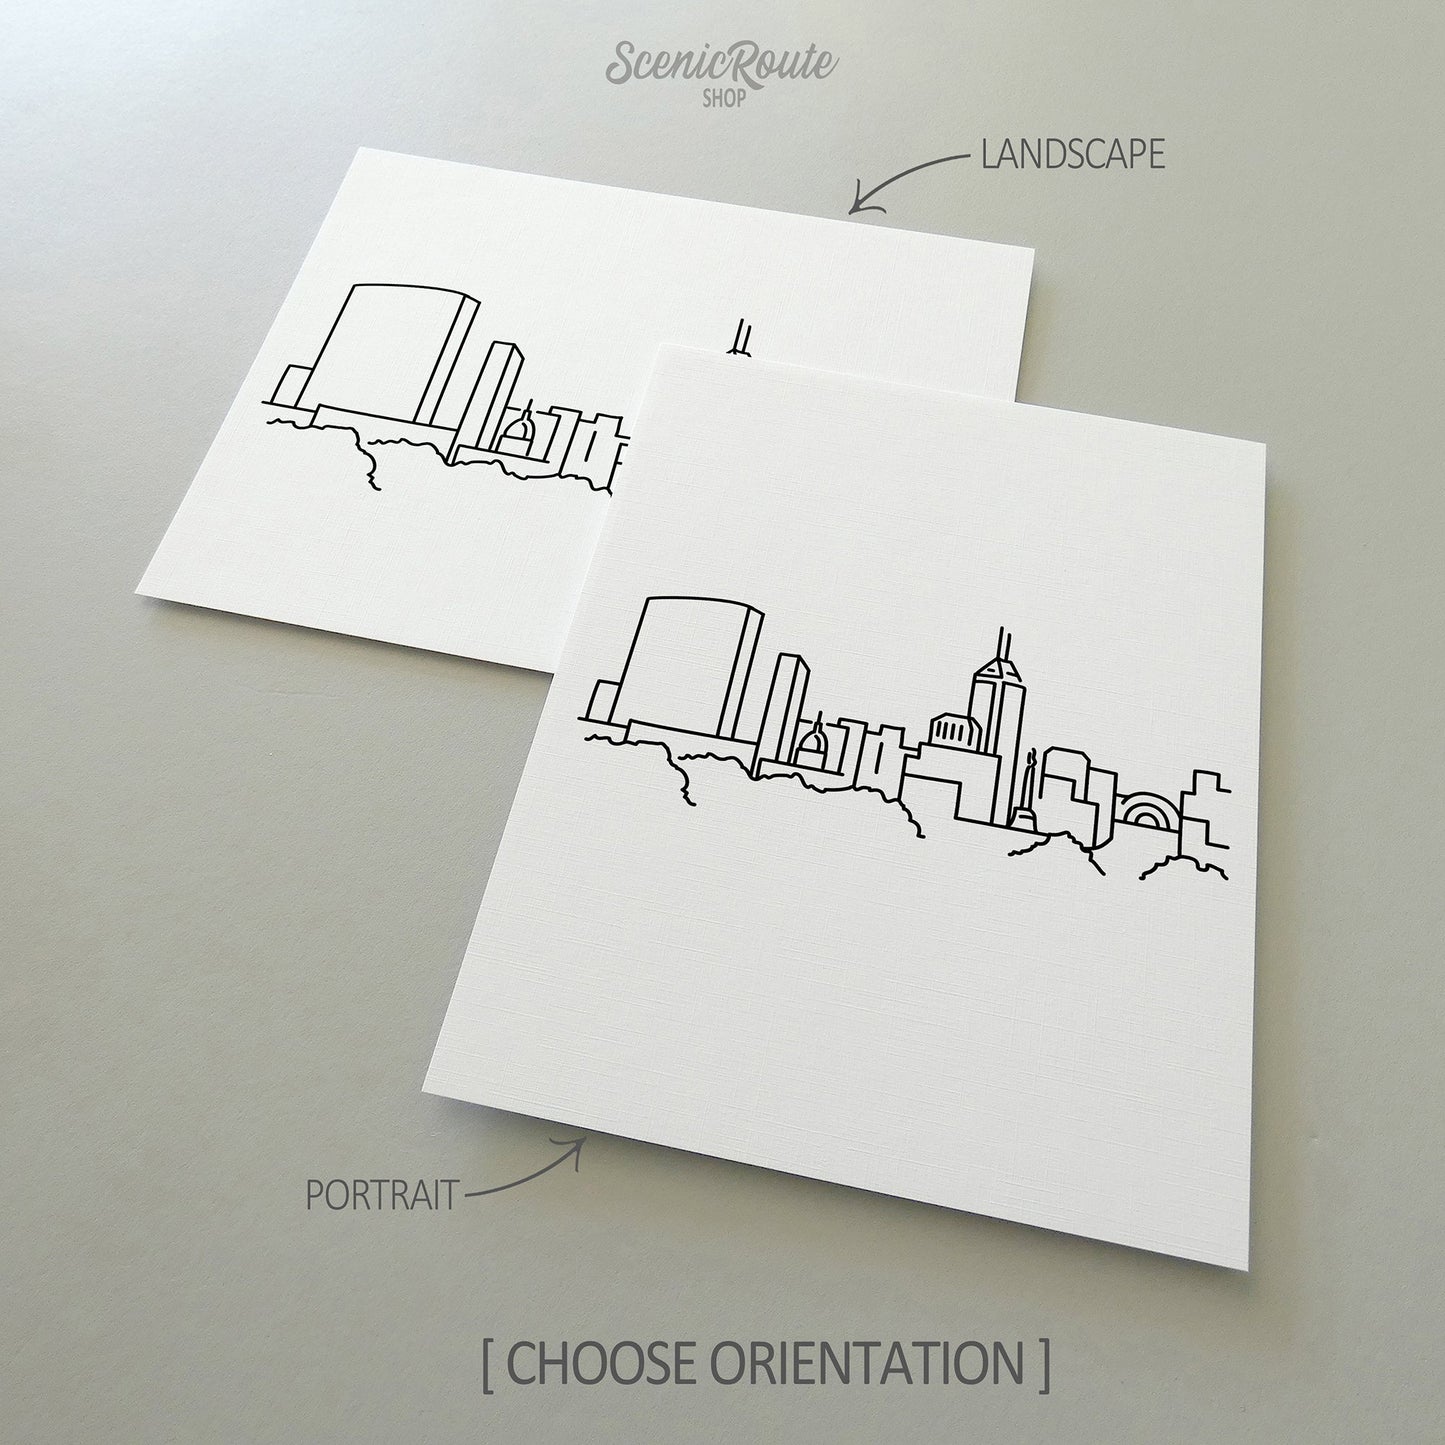 Two line art drawings of the Indianapolis Skyline on white linen paper with a gray background.  The pieces are shown in portrait and landscape orientation for the available art print options.